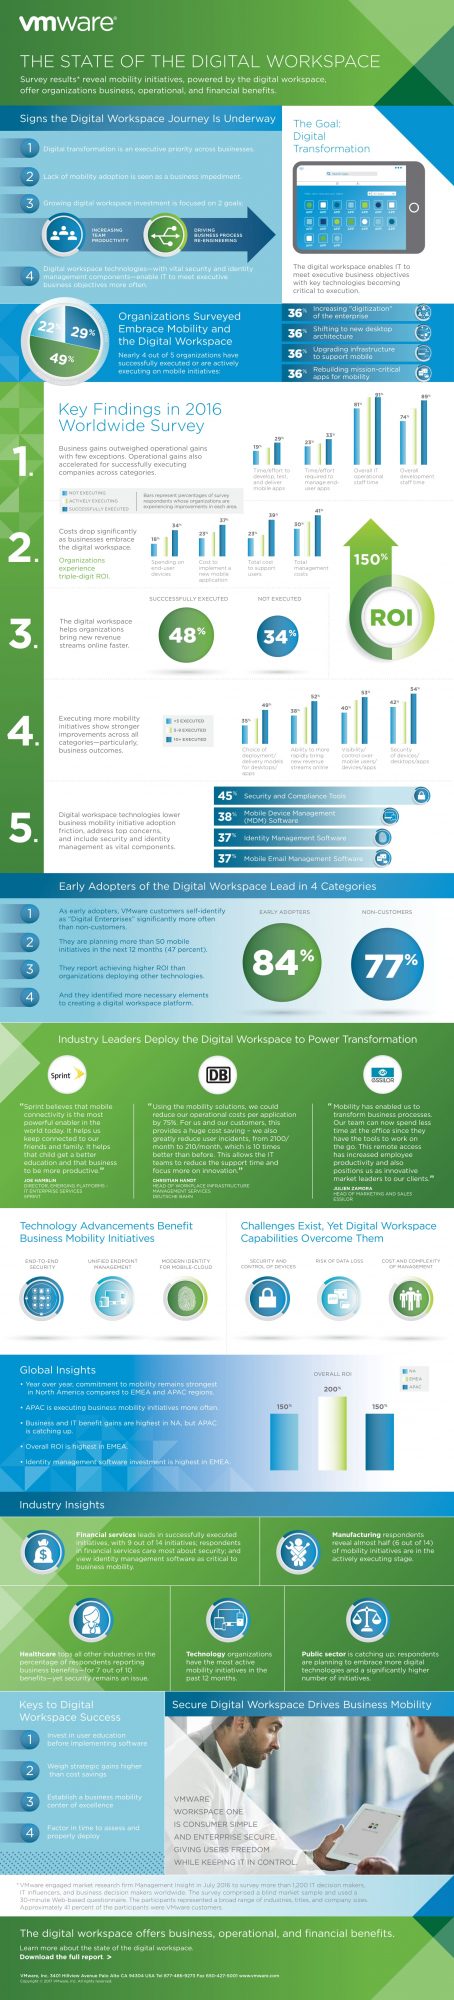 VMWare-2016-state-of-the-digital-workspace-infographgic